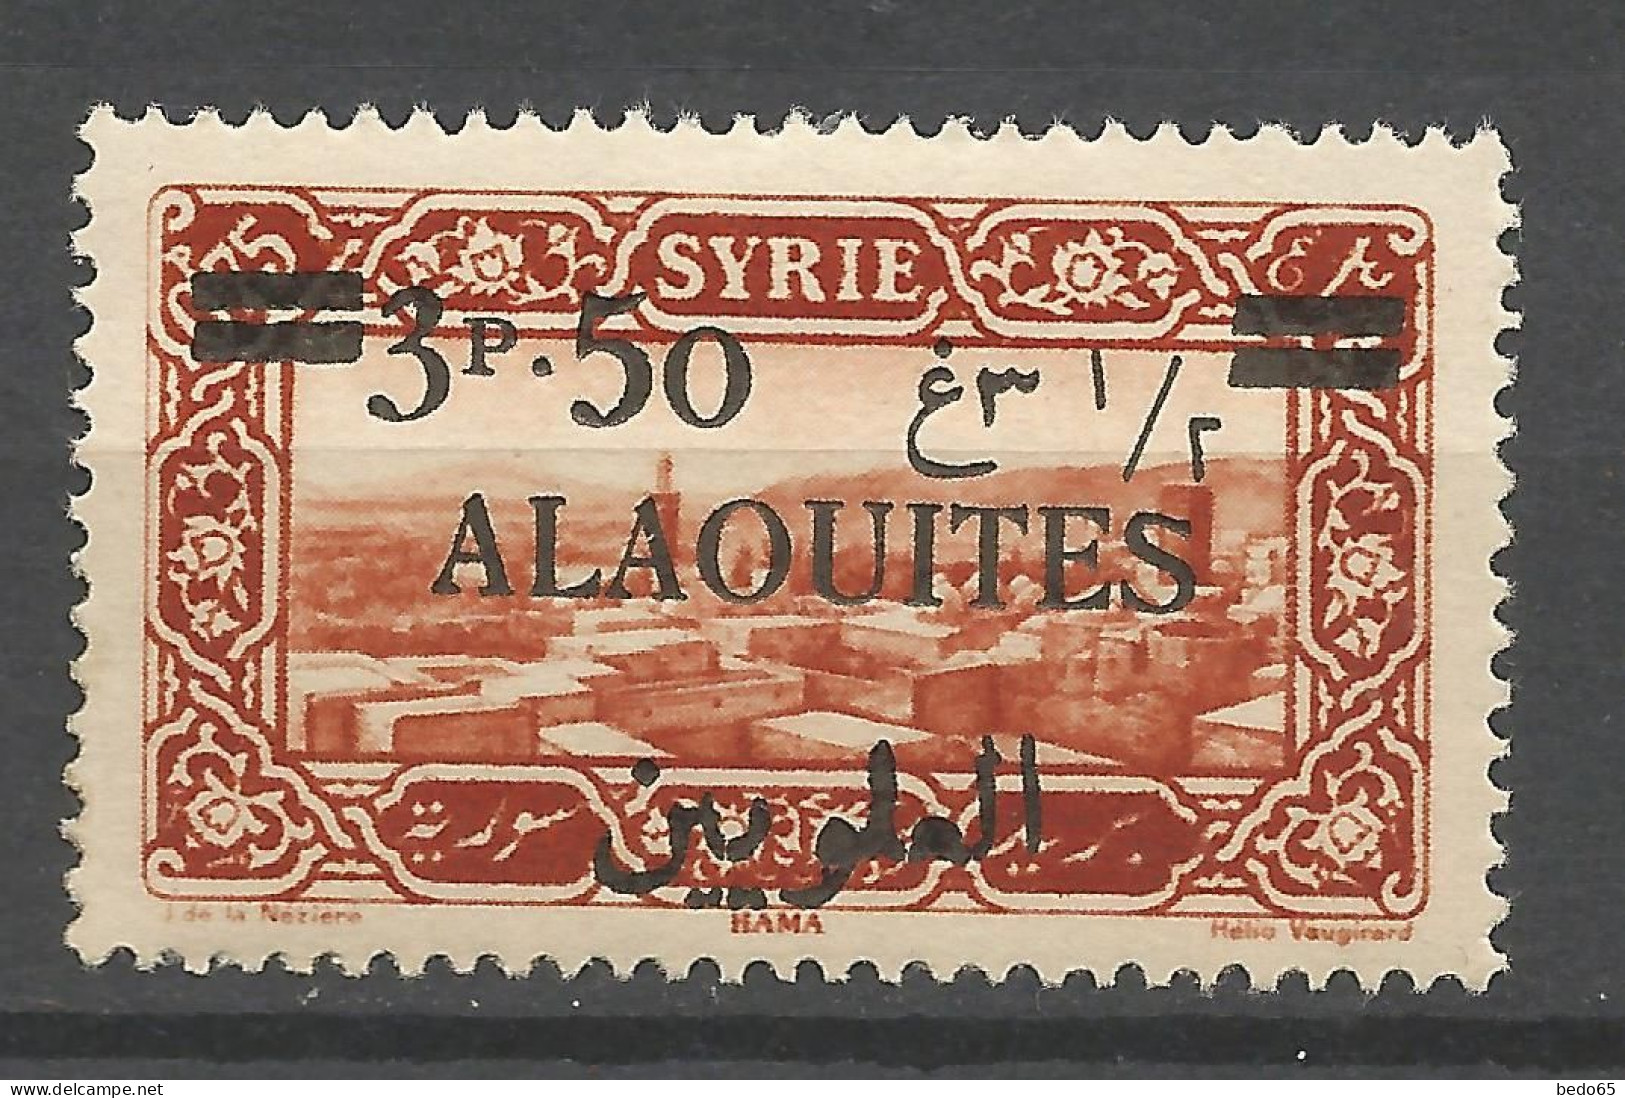 ALAOUITES N° 35 S D'ALAOUITES Aplati / Used - Used Stamps